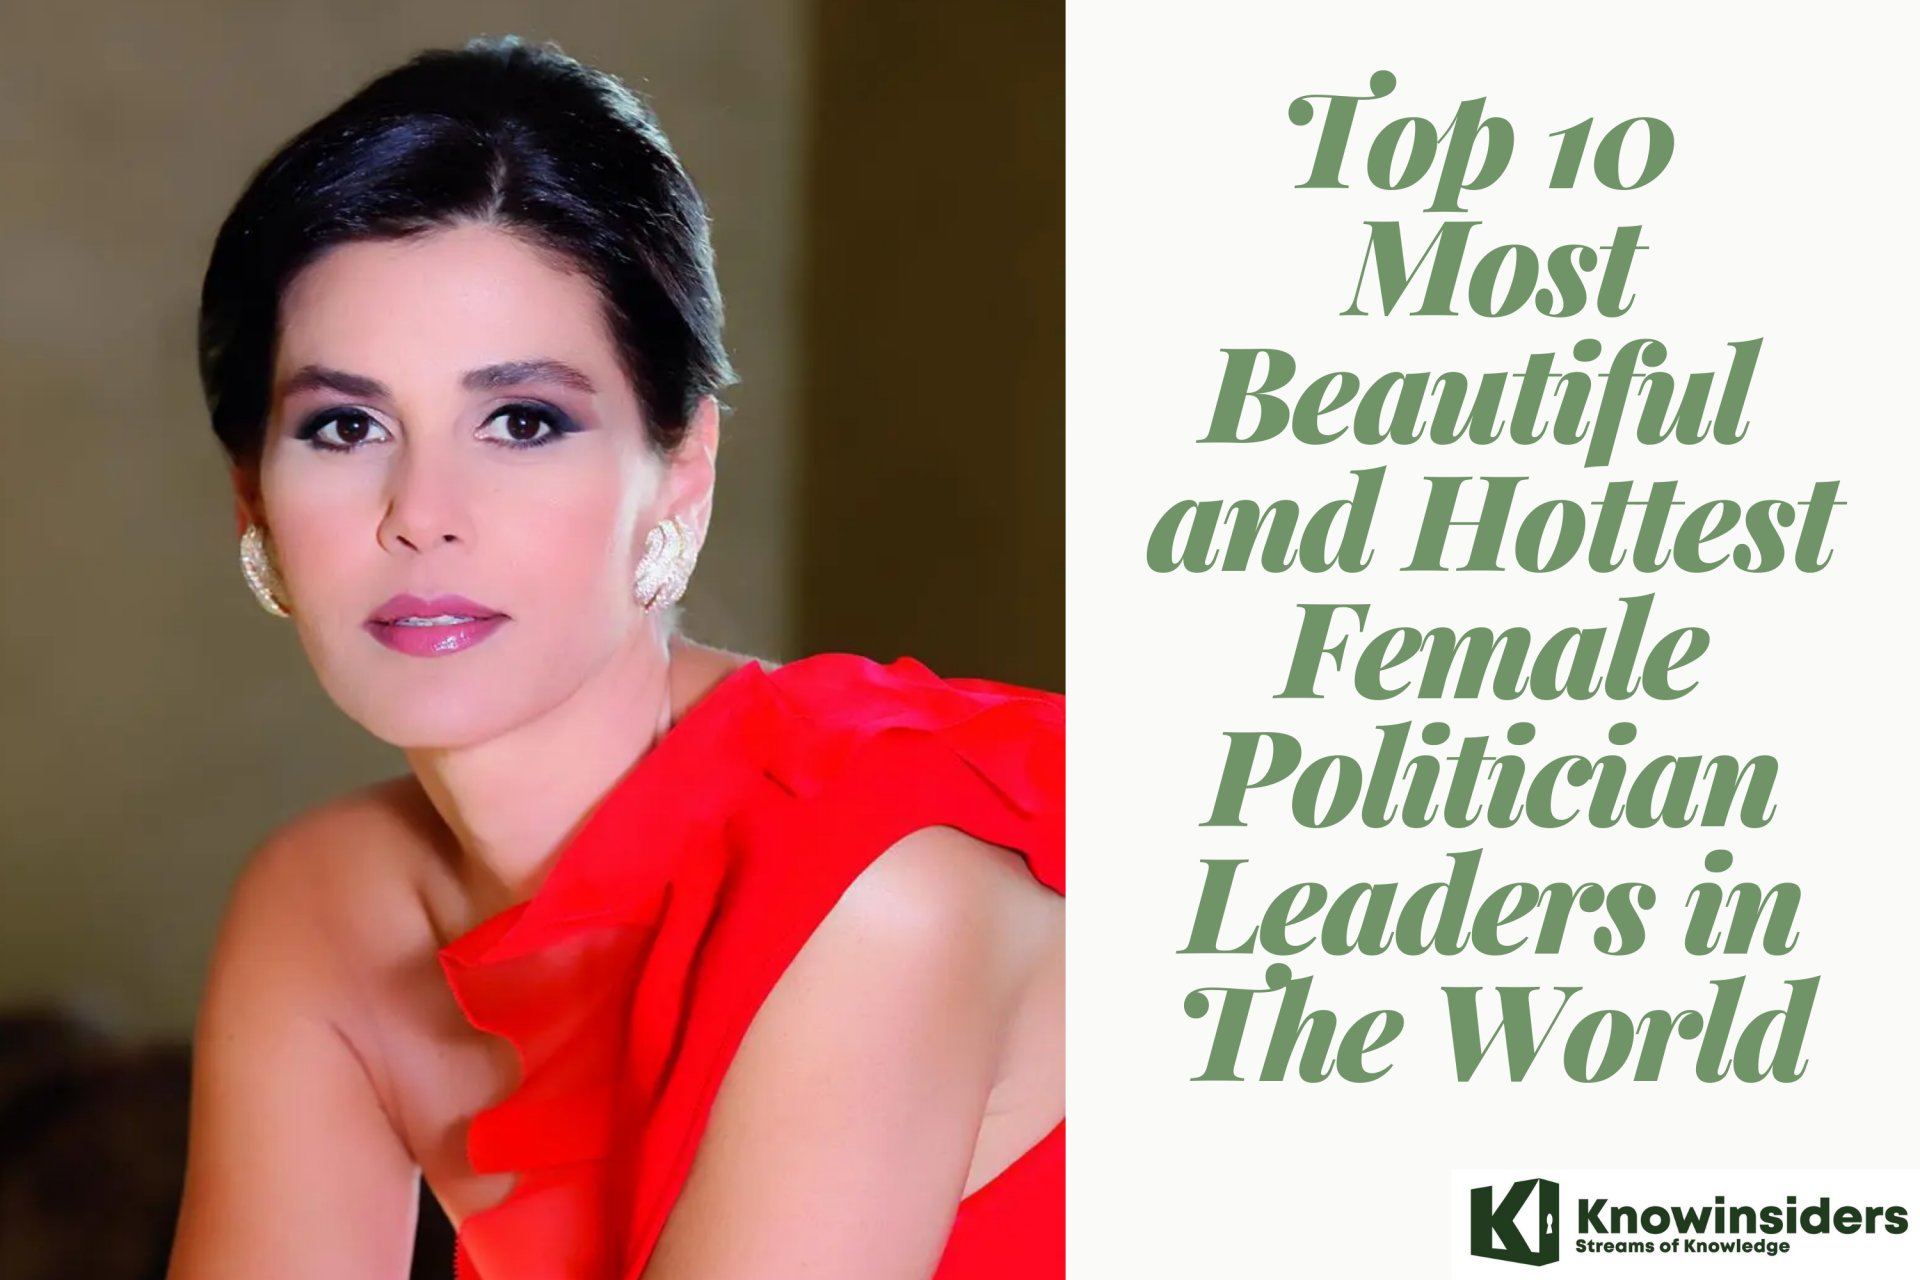 Top 10 Most Beautiful Female Political Leaders in The World